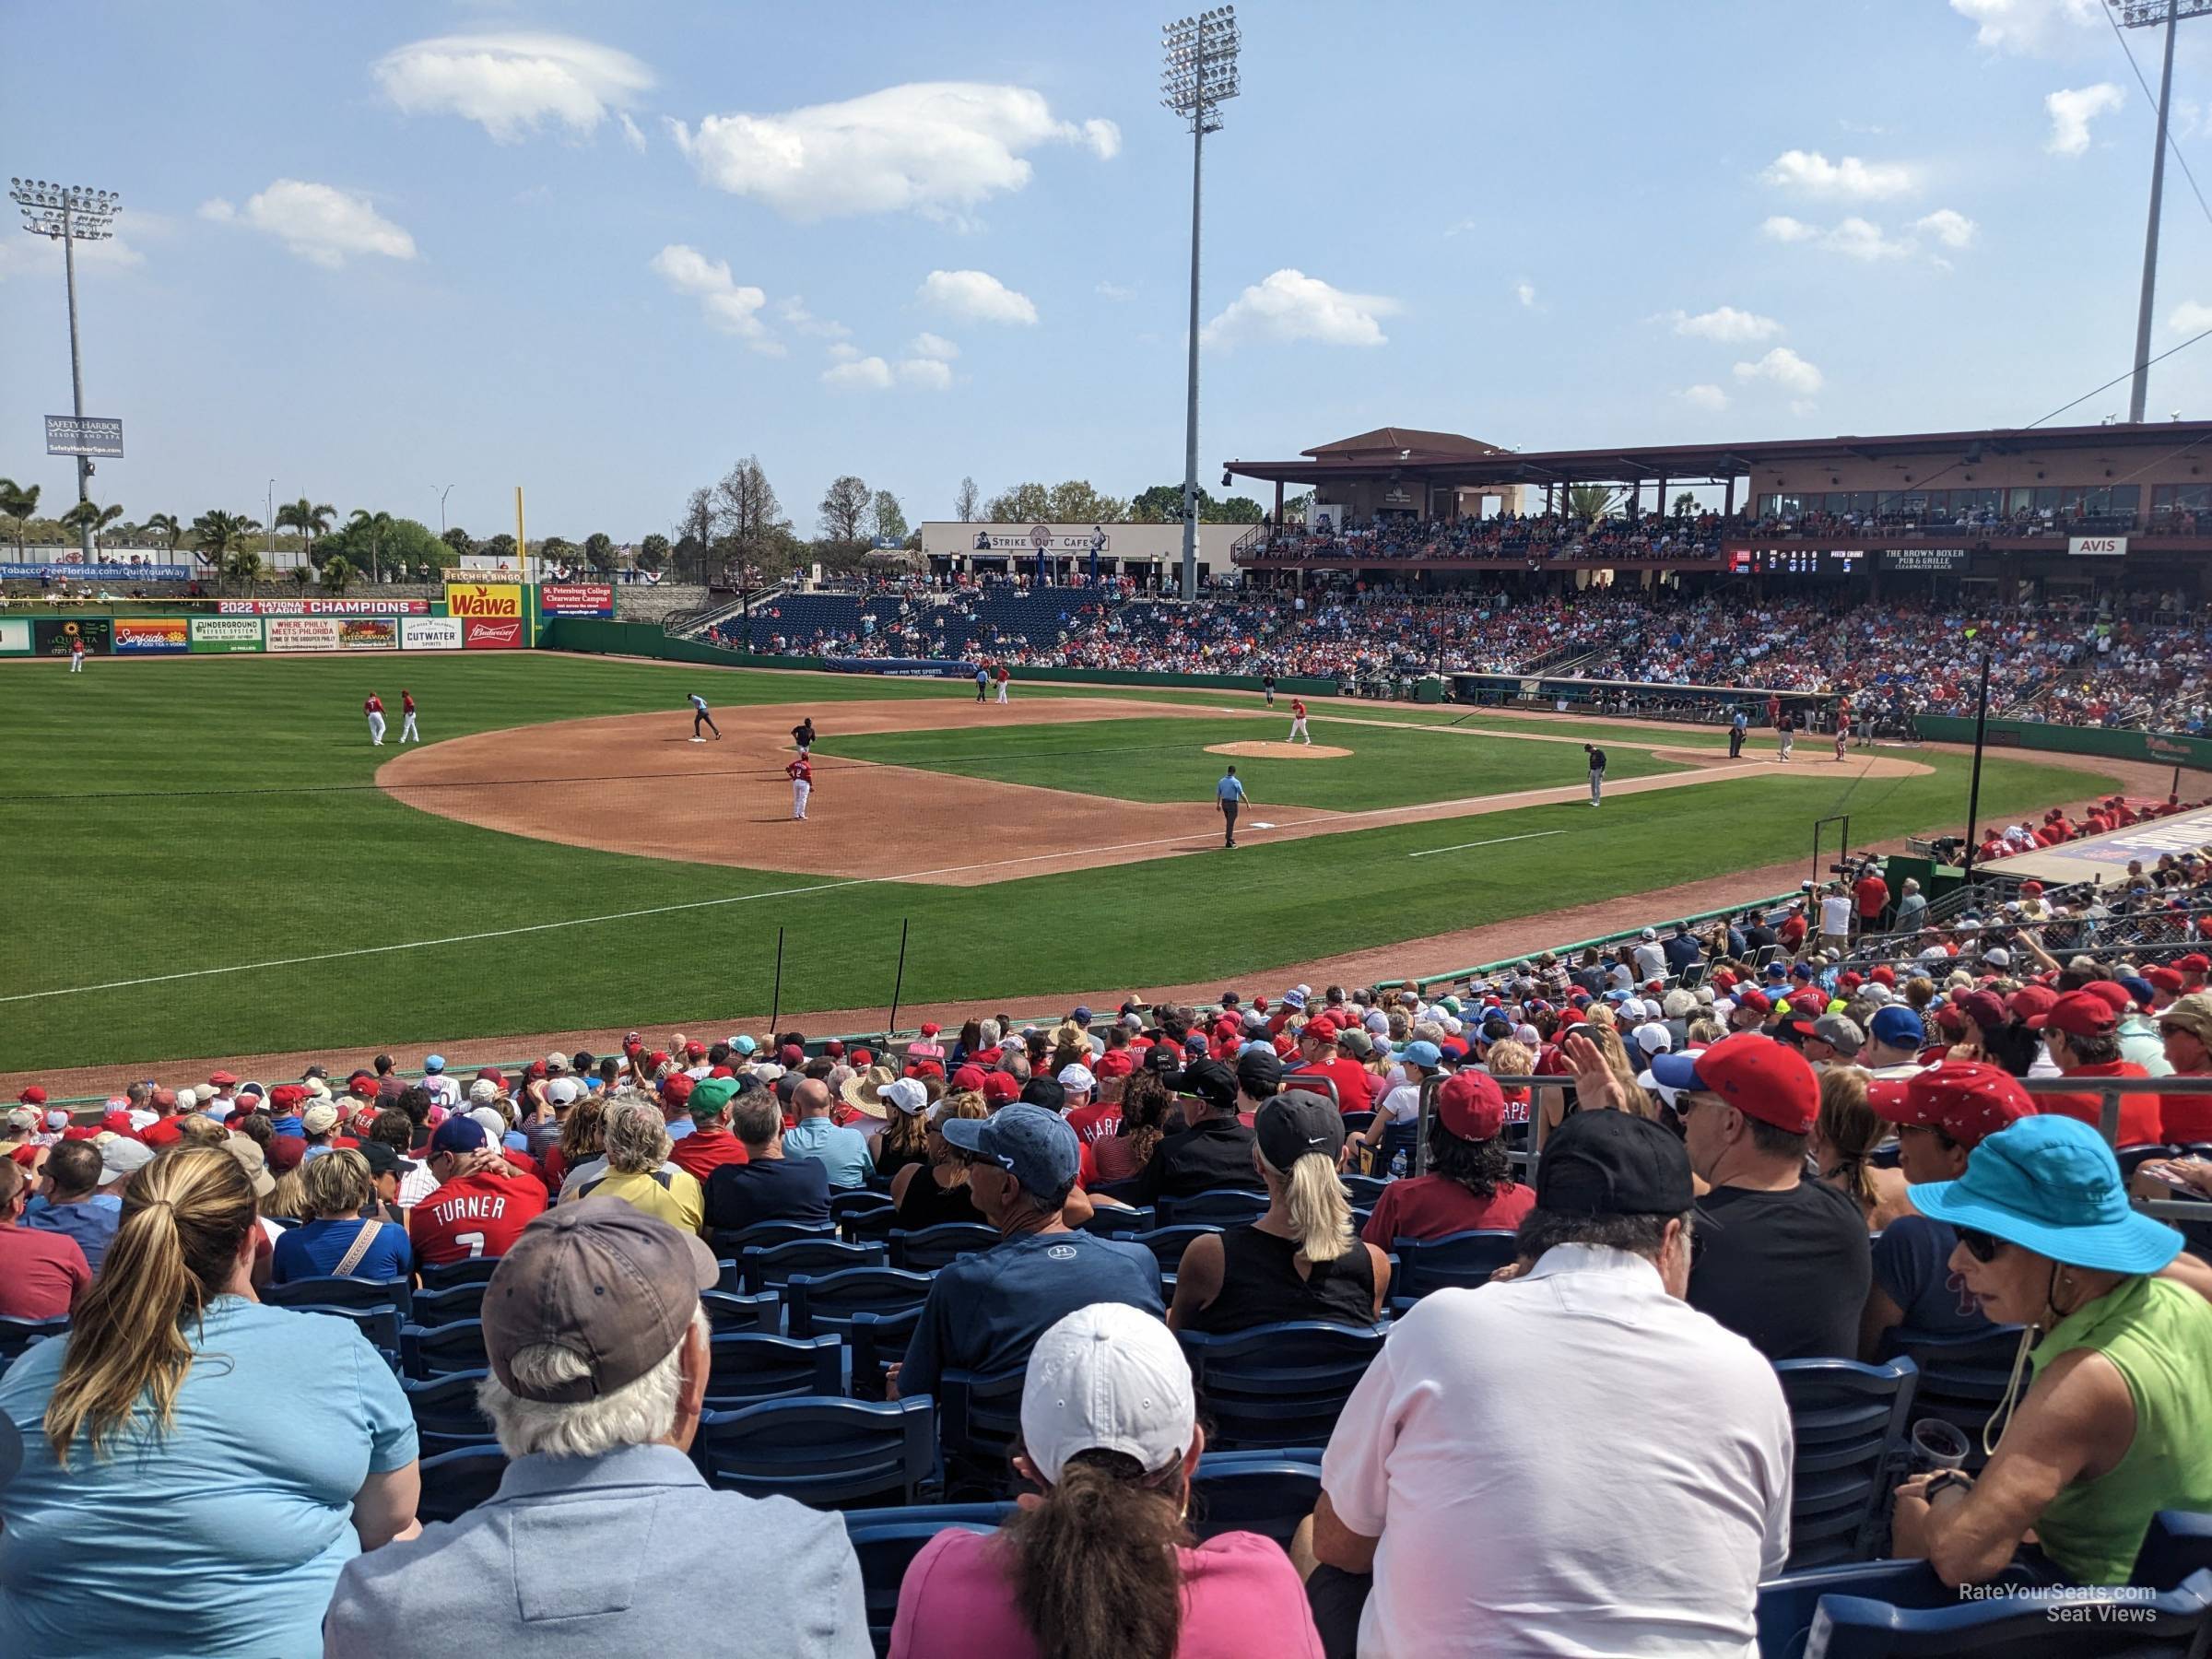 section 119, row 23 seat view  - baycare ballpark